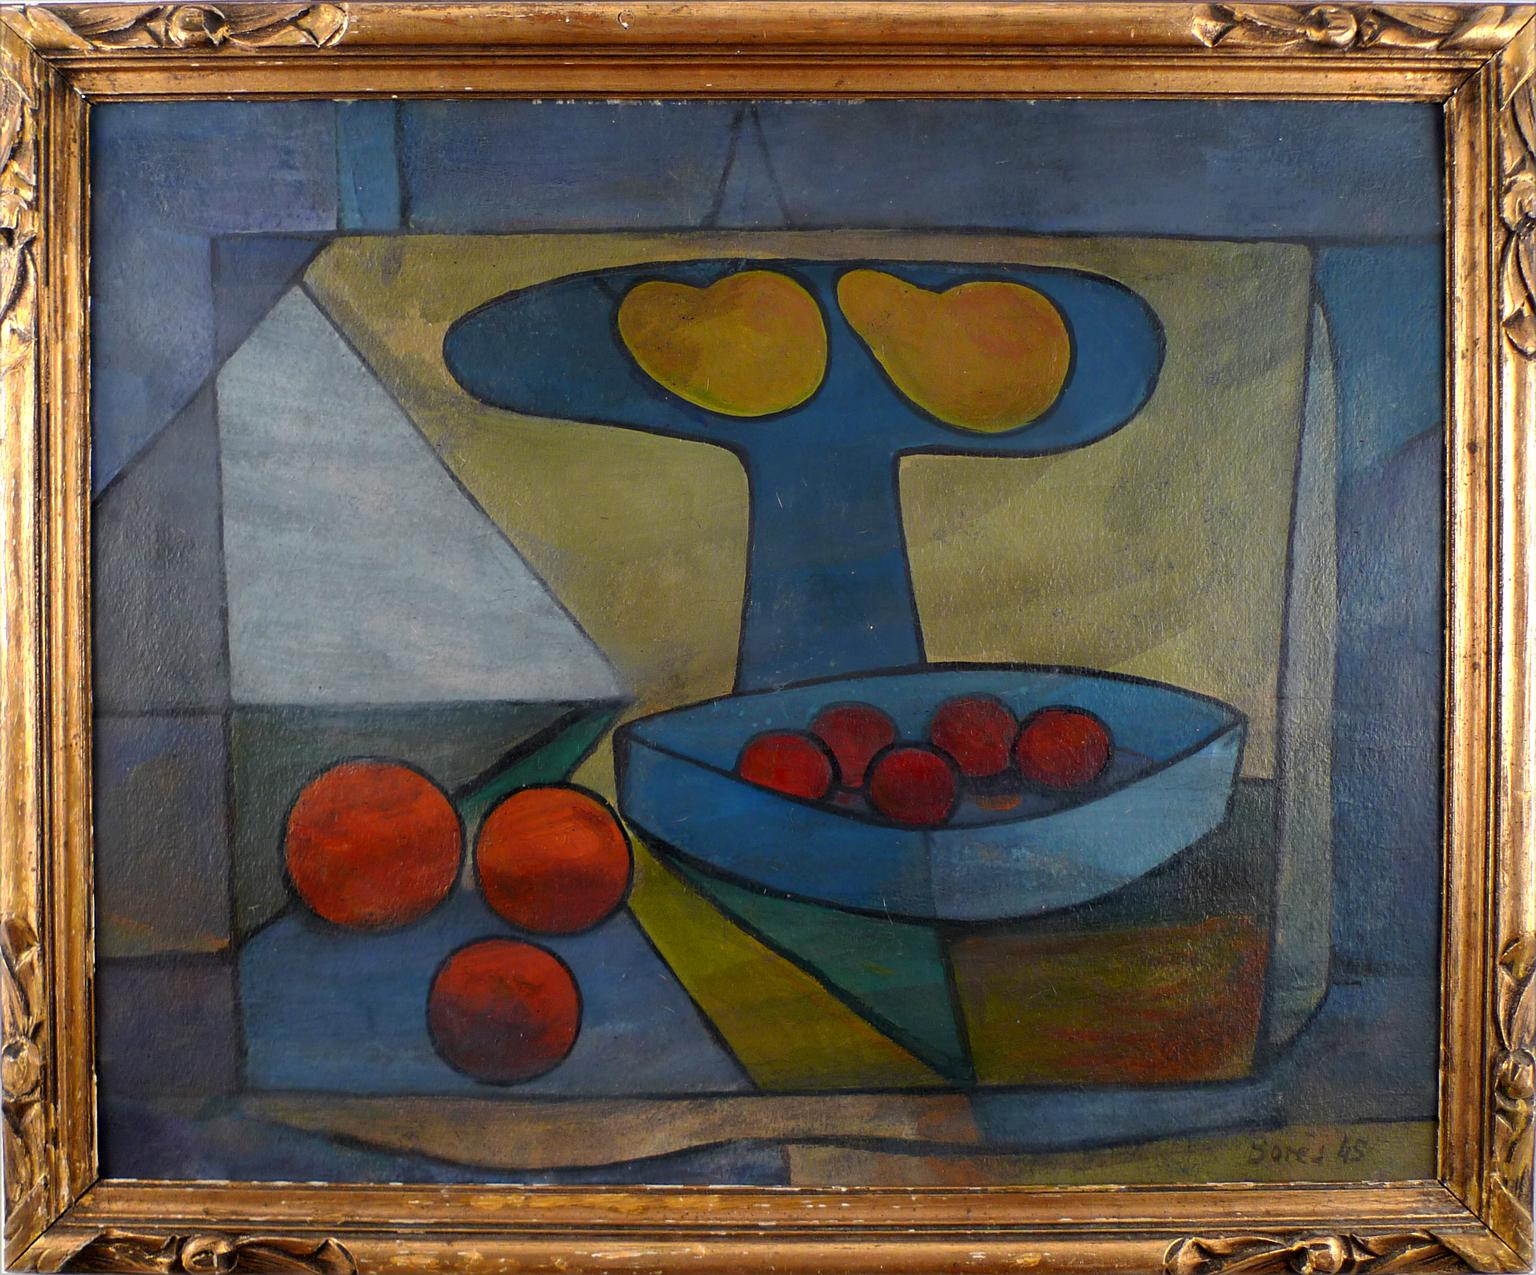 "Still Life of Fruits", 20th Century Oil on Cardboard by Artist Francisco Bores